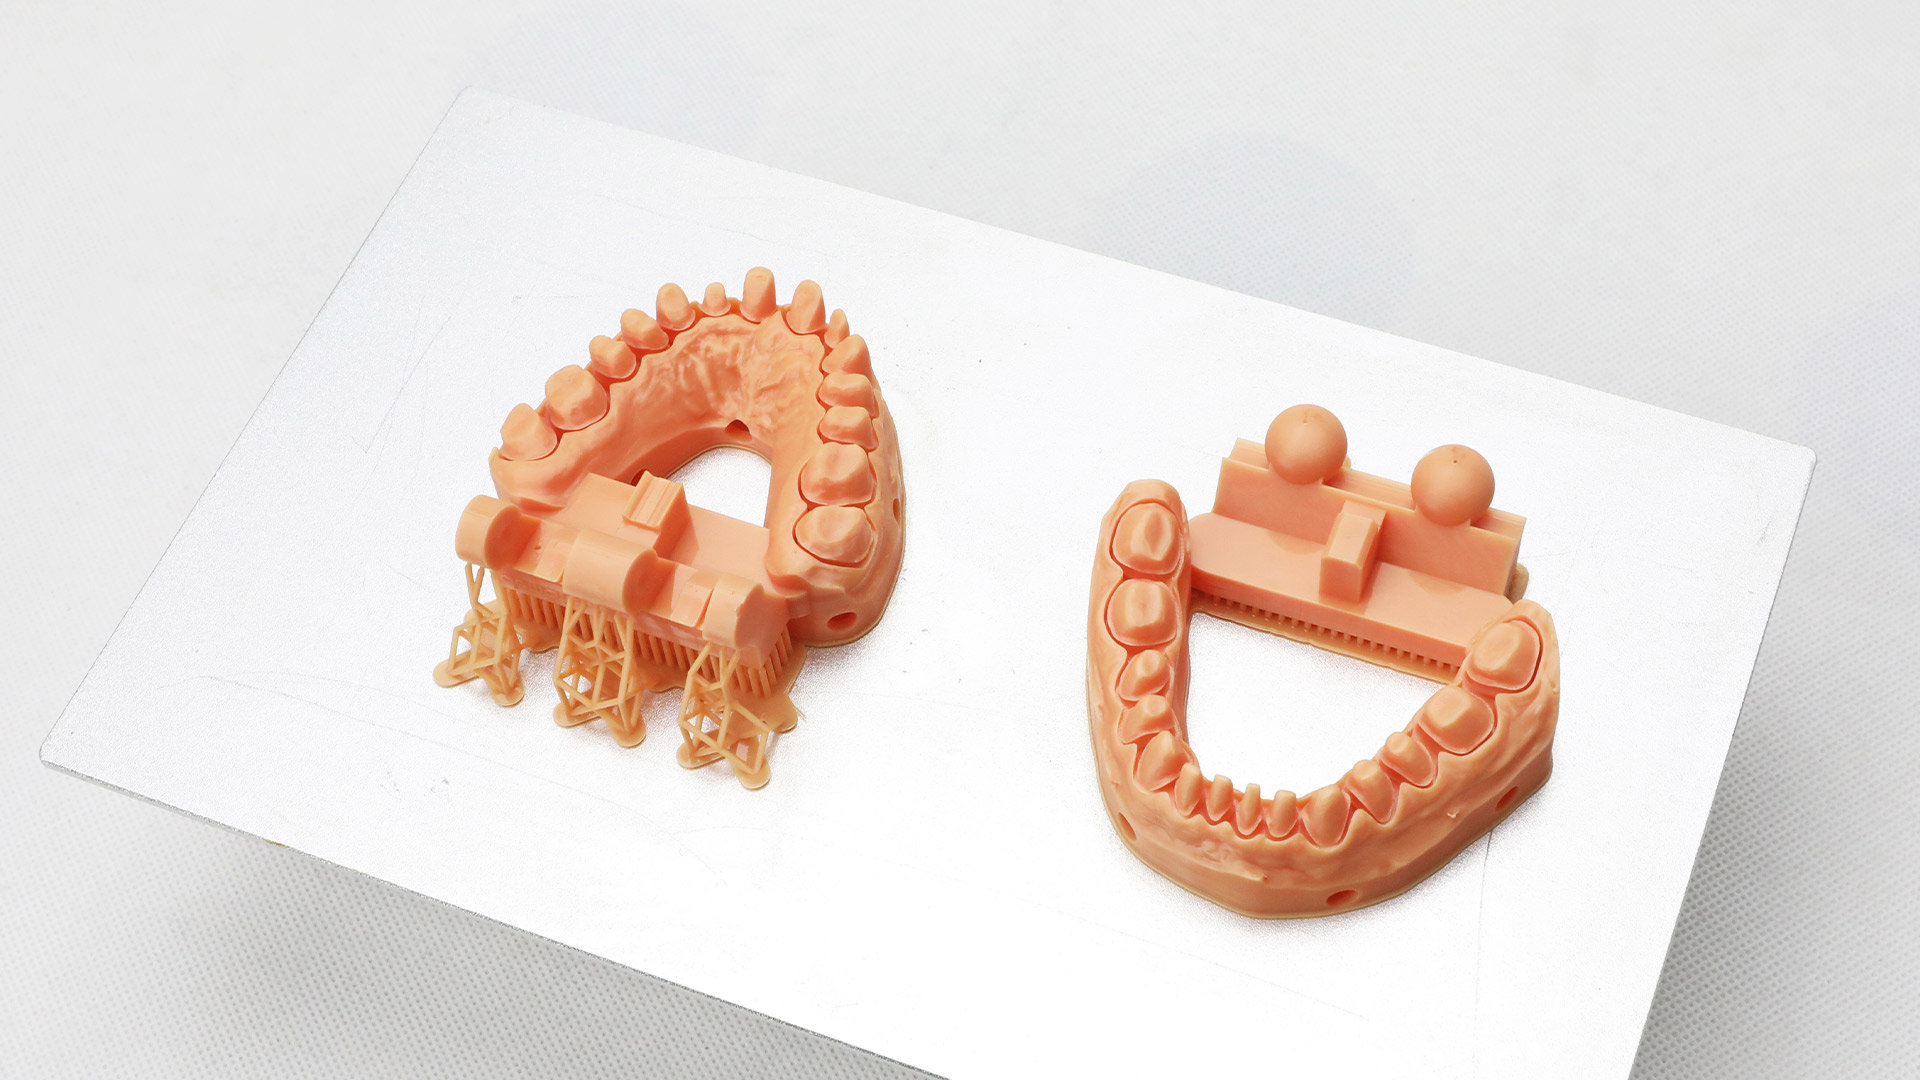 How Much Does a 3D Printer Cost to 3D Print Teeth?